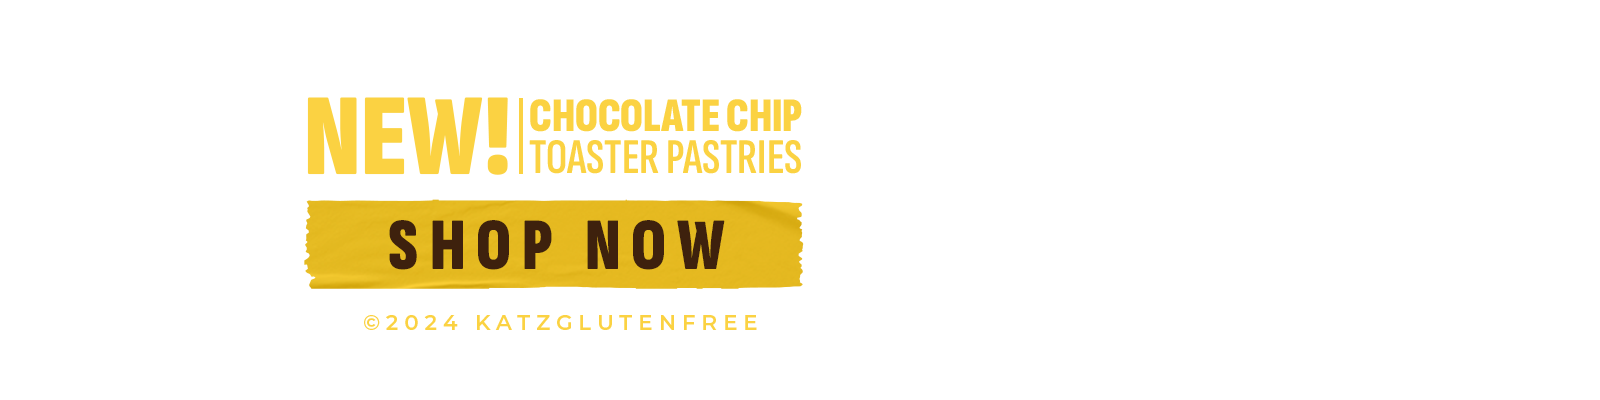 Introducing Chocolate Chip Toaster Pastries!